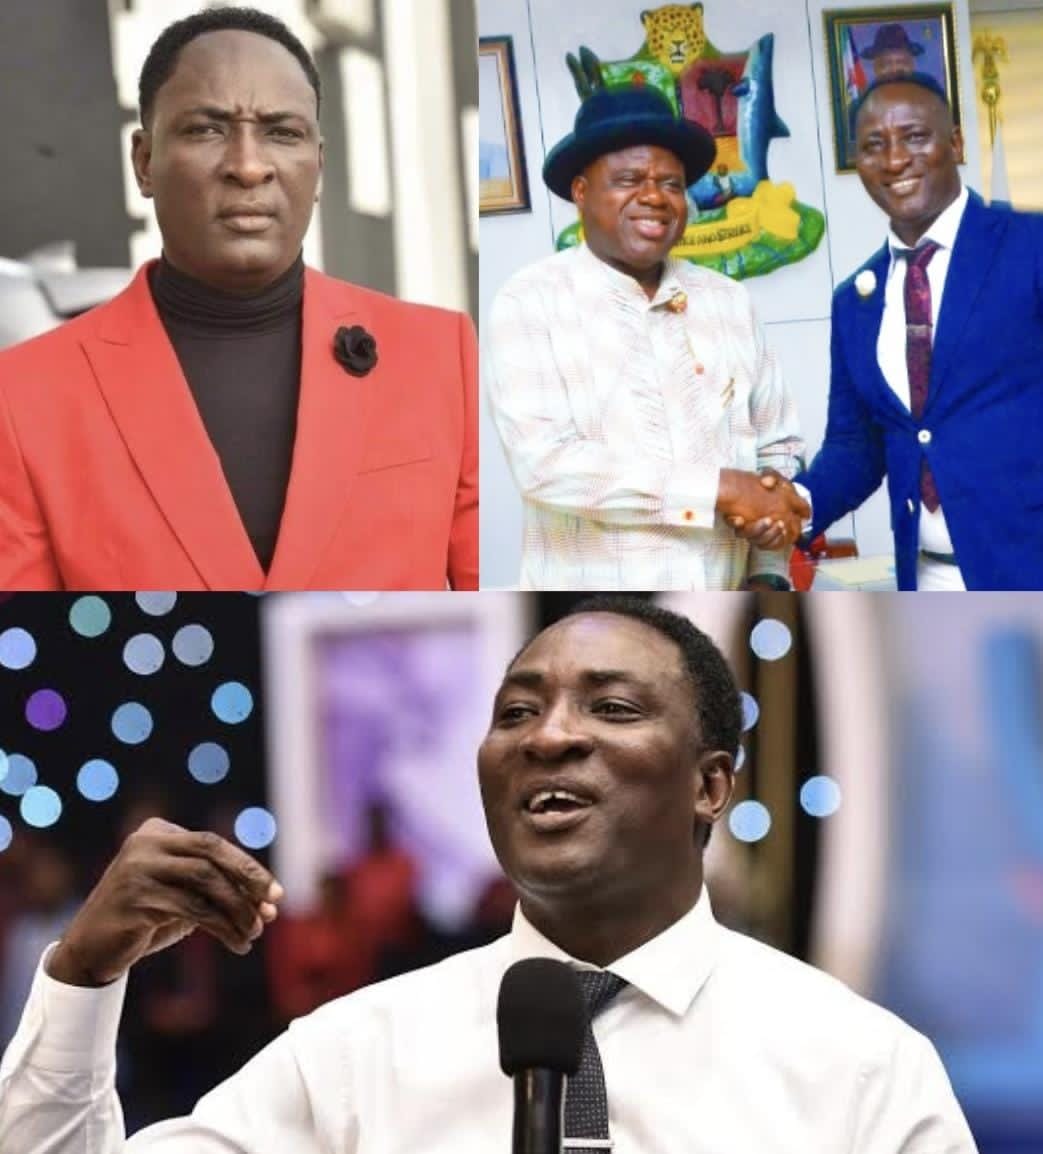 News: Unprecedented turnout as Billionaire Prophet Jeremiah Fufeyin astounds the masses with extraordinary miracles in Yenegoa